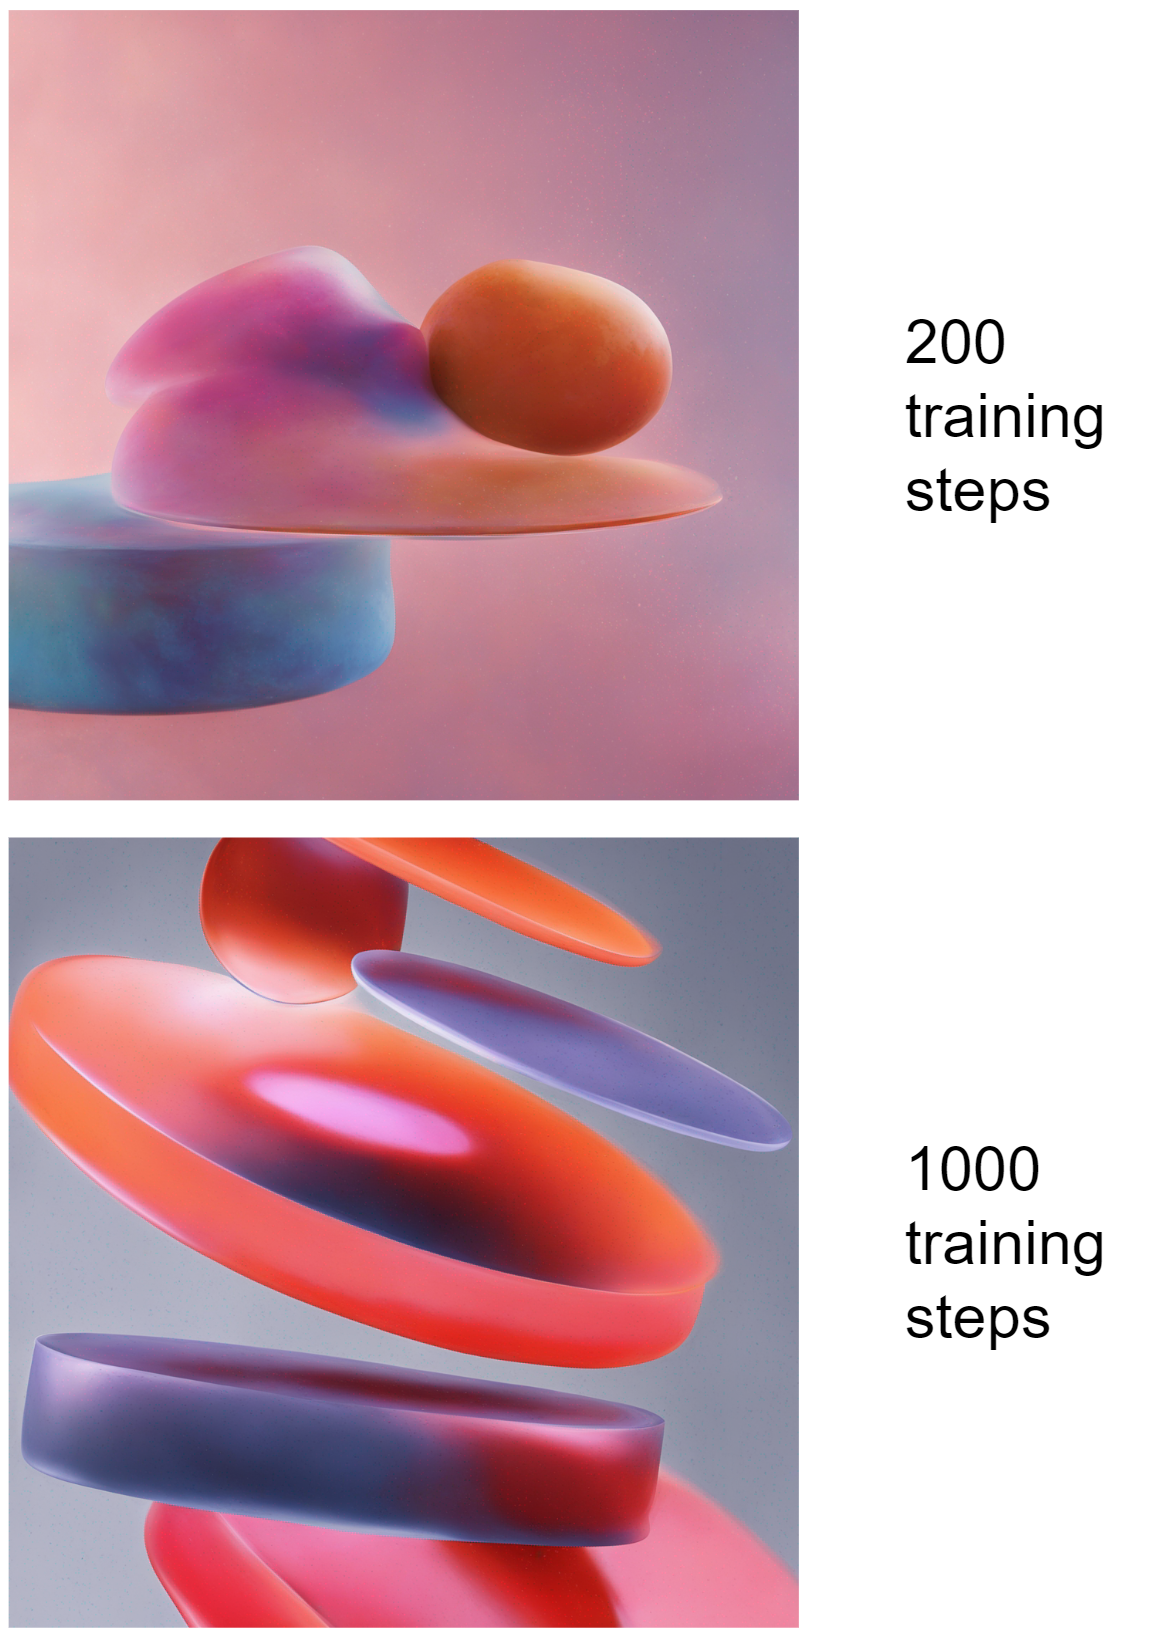 The image generated with LoRA after 200 and 1000 training steps